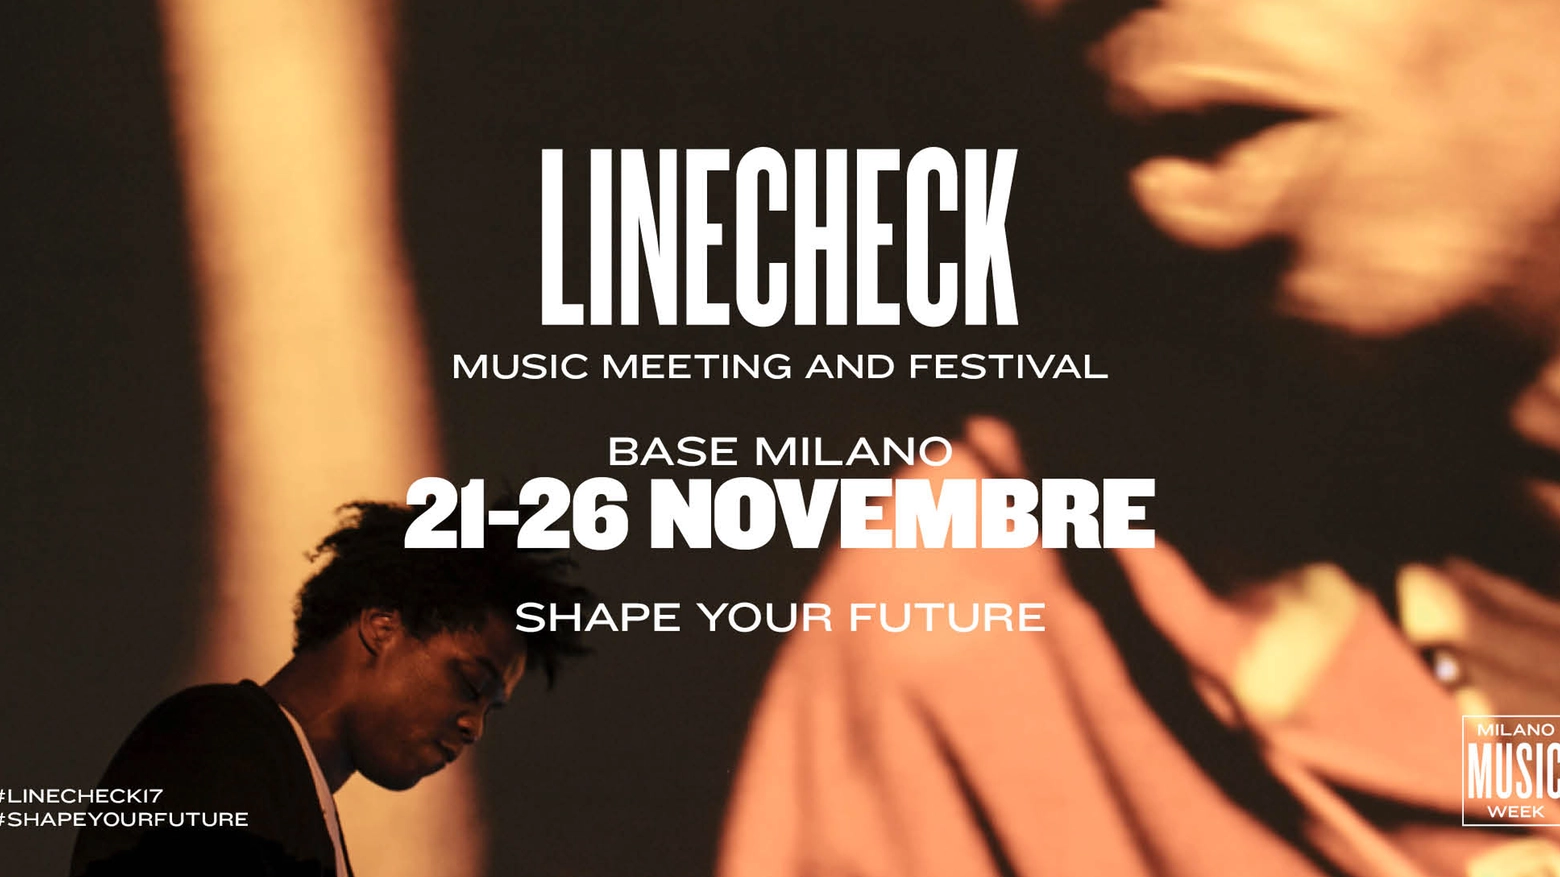 Linecheck Music Meeting and Festival